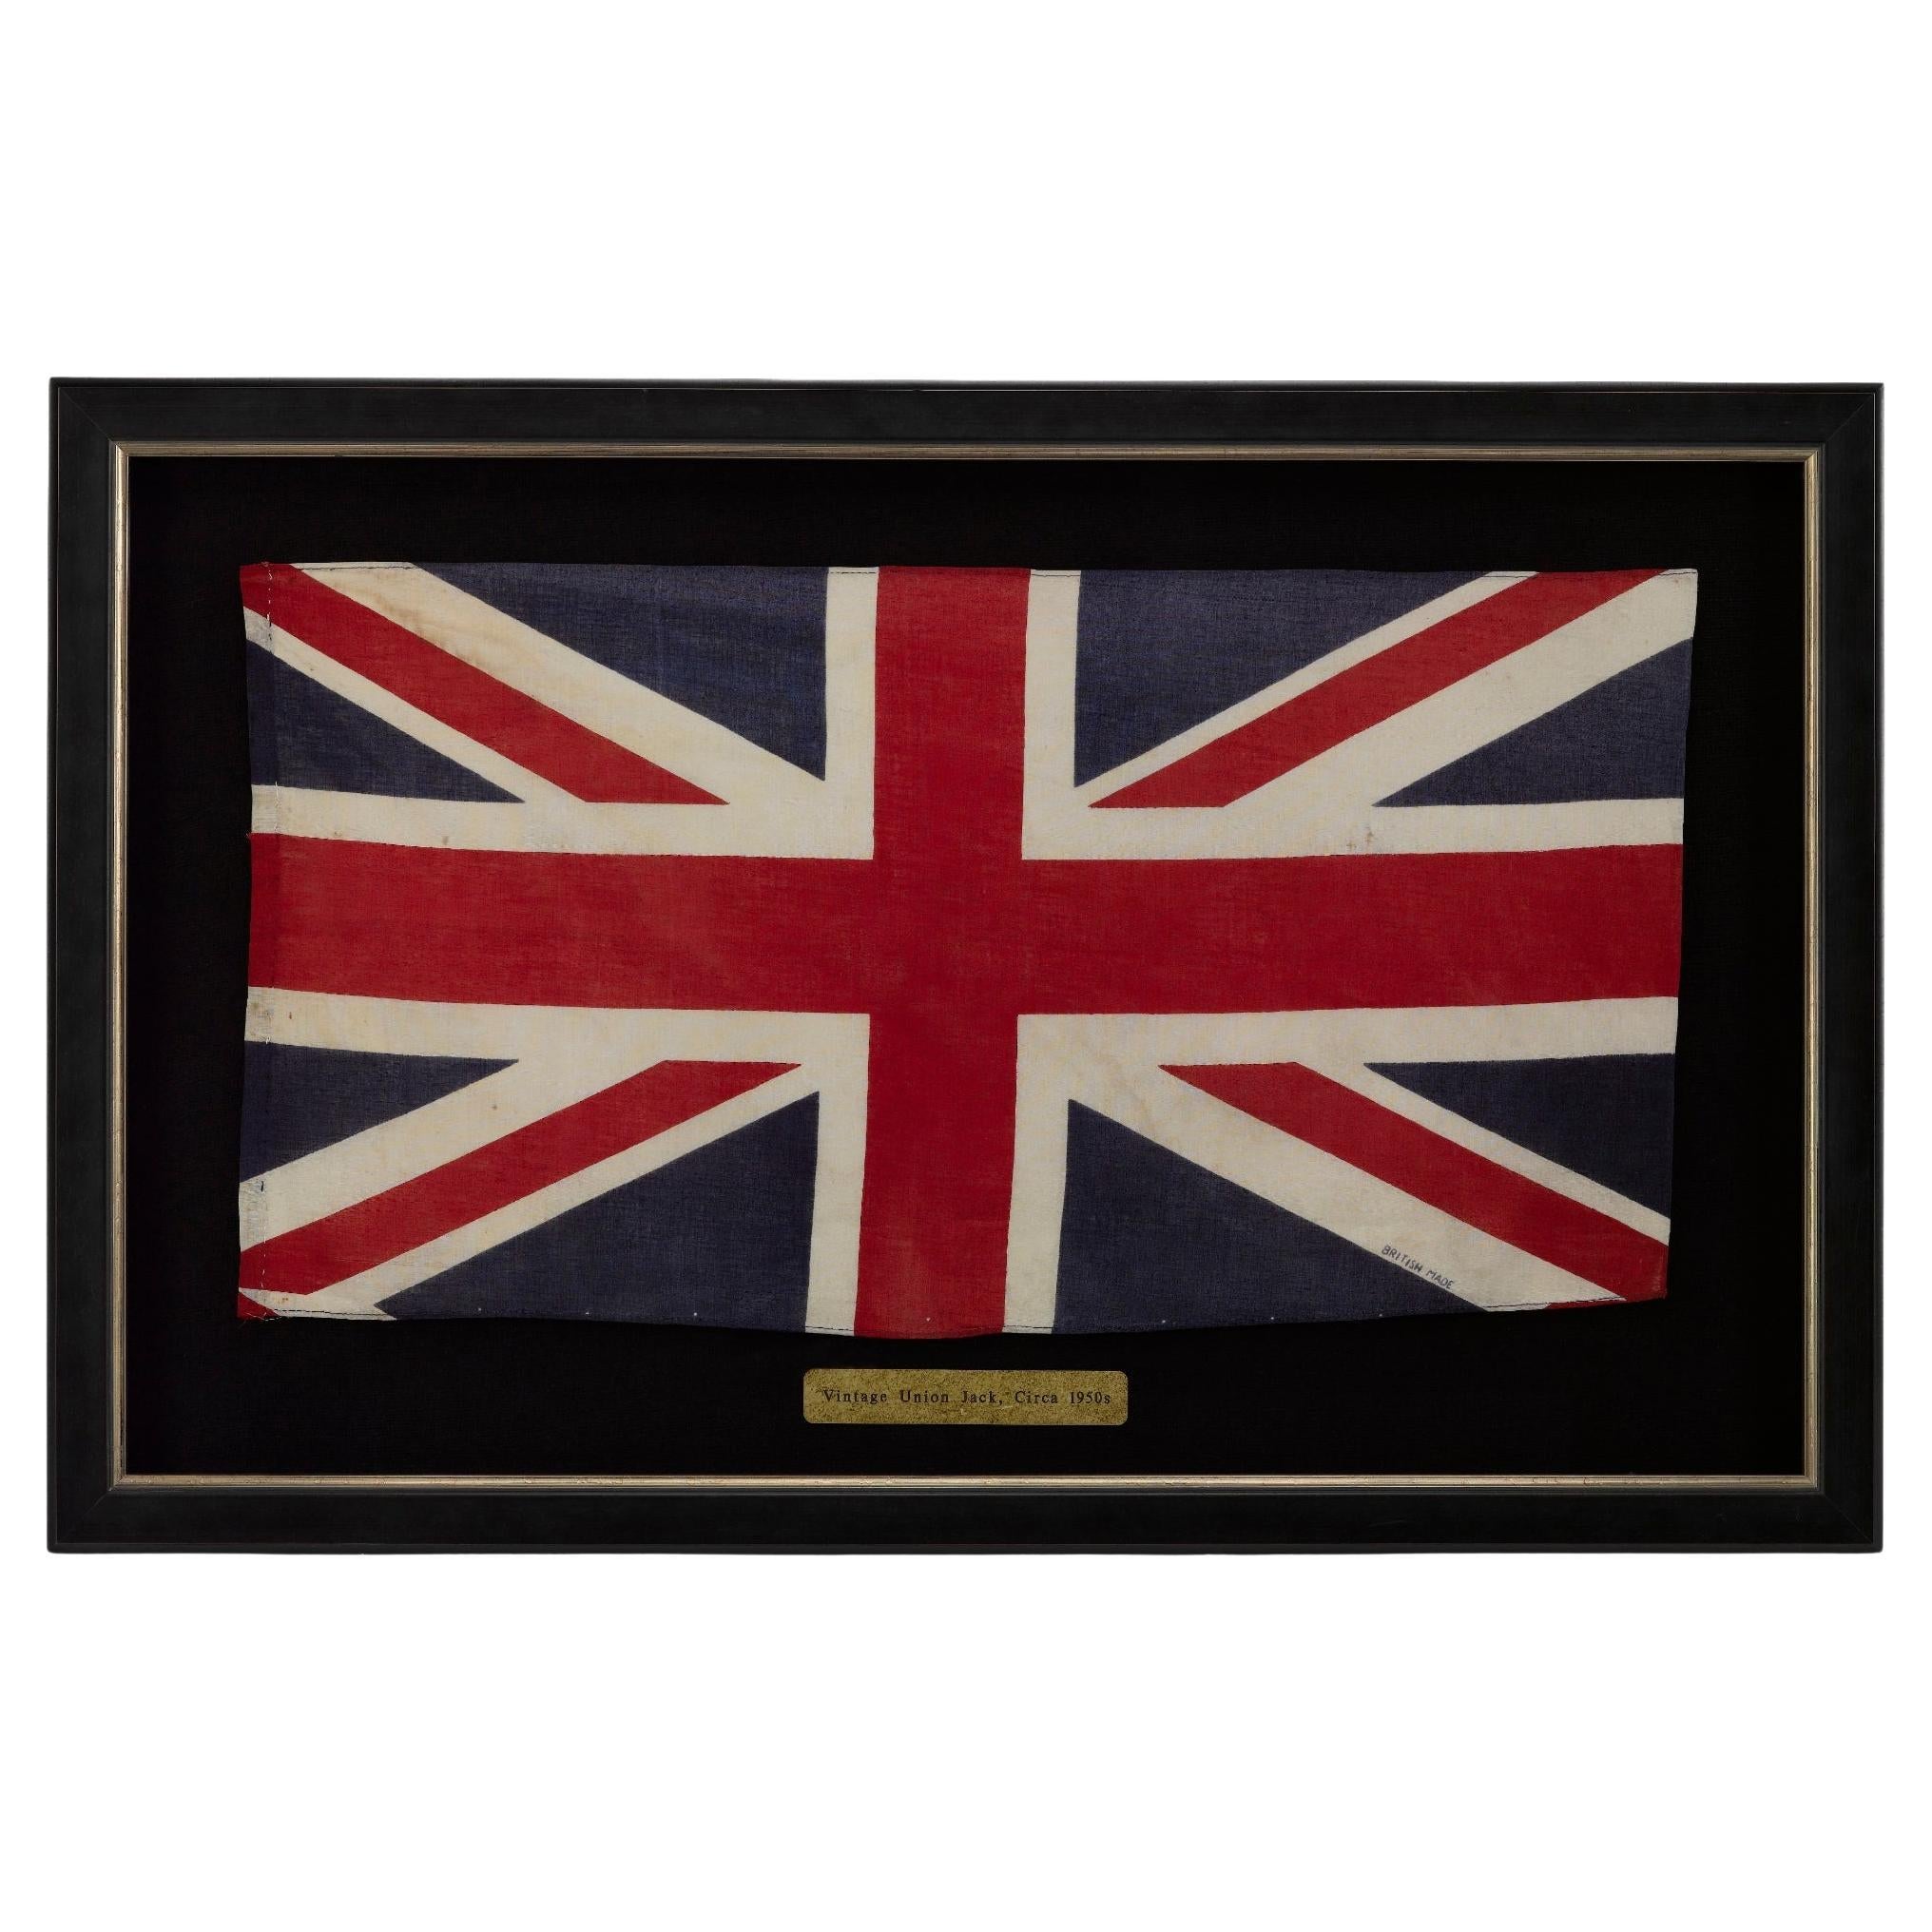 What does the Grand Union flag stand for?